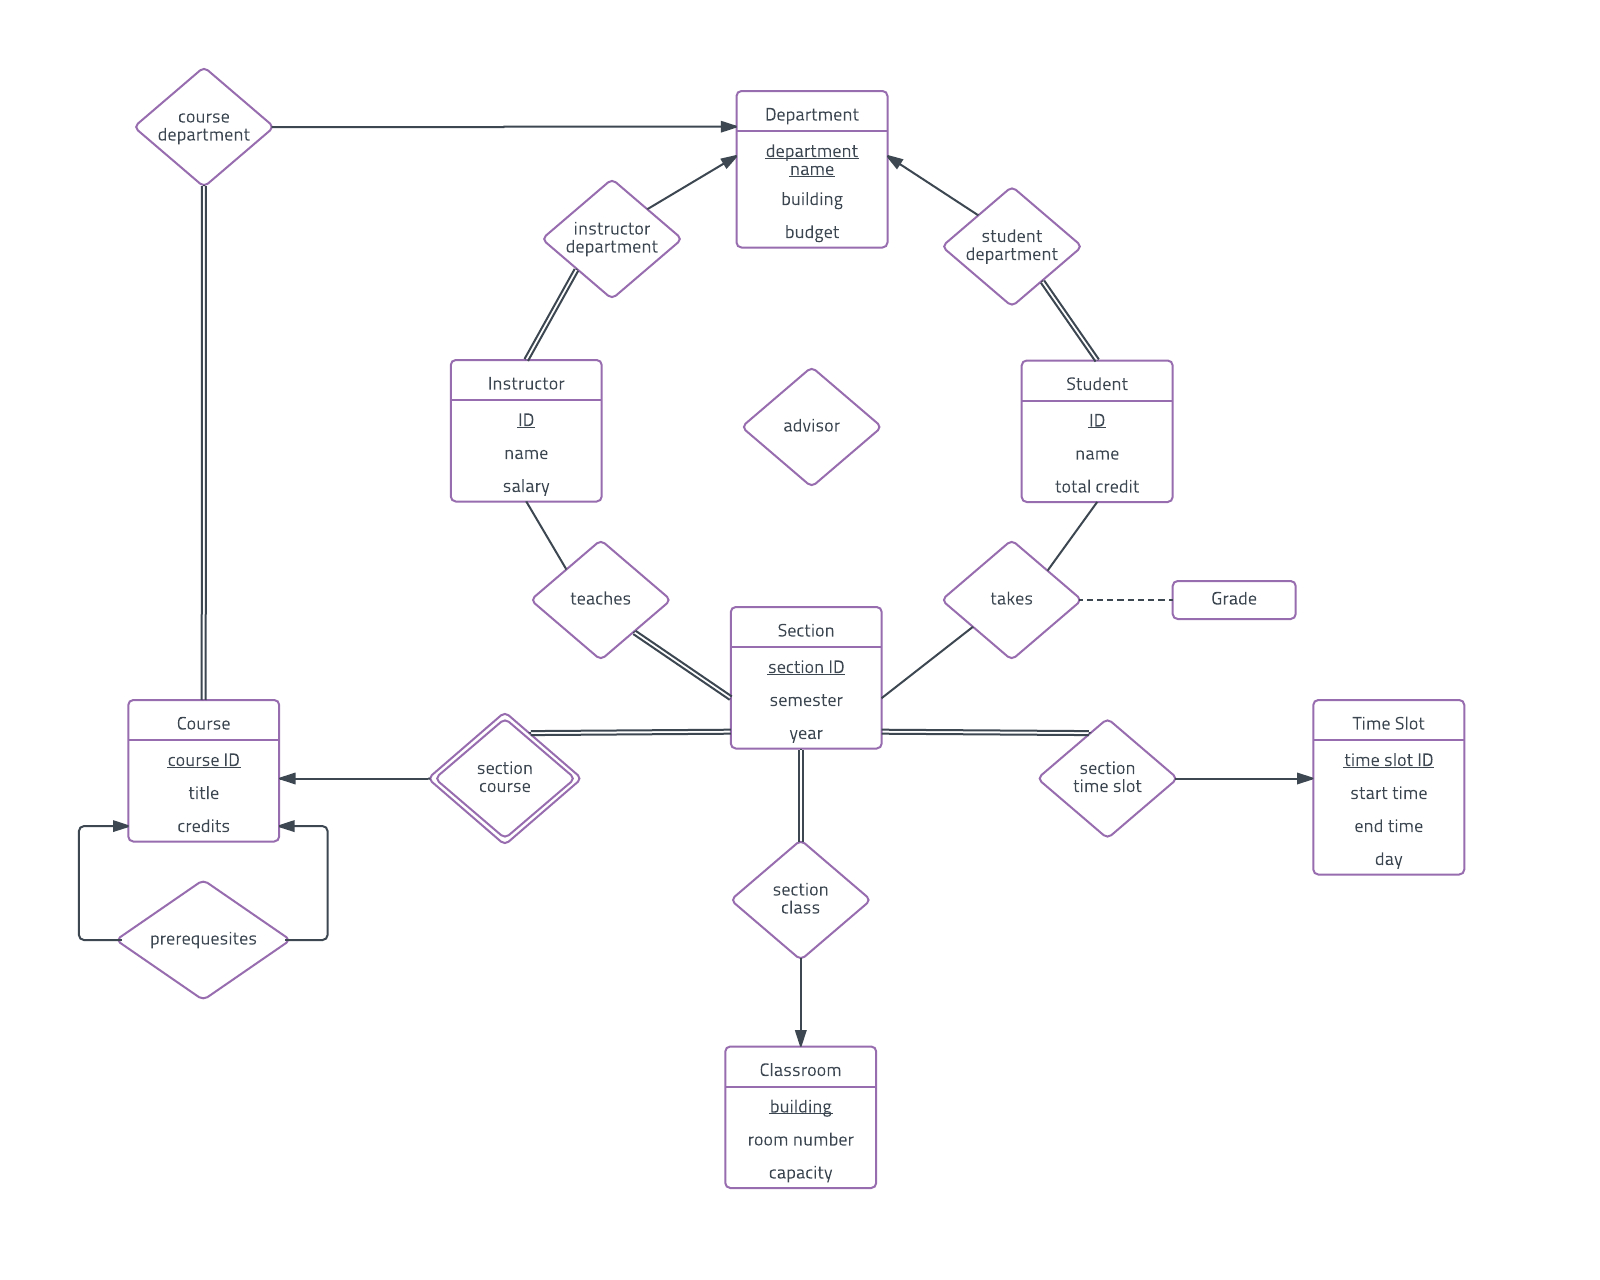 Er Diagram Examples And Templates | Lucidchart within Er Diagram Examples Hotel Management